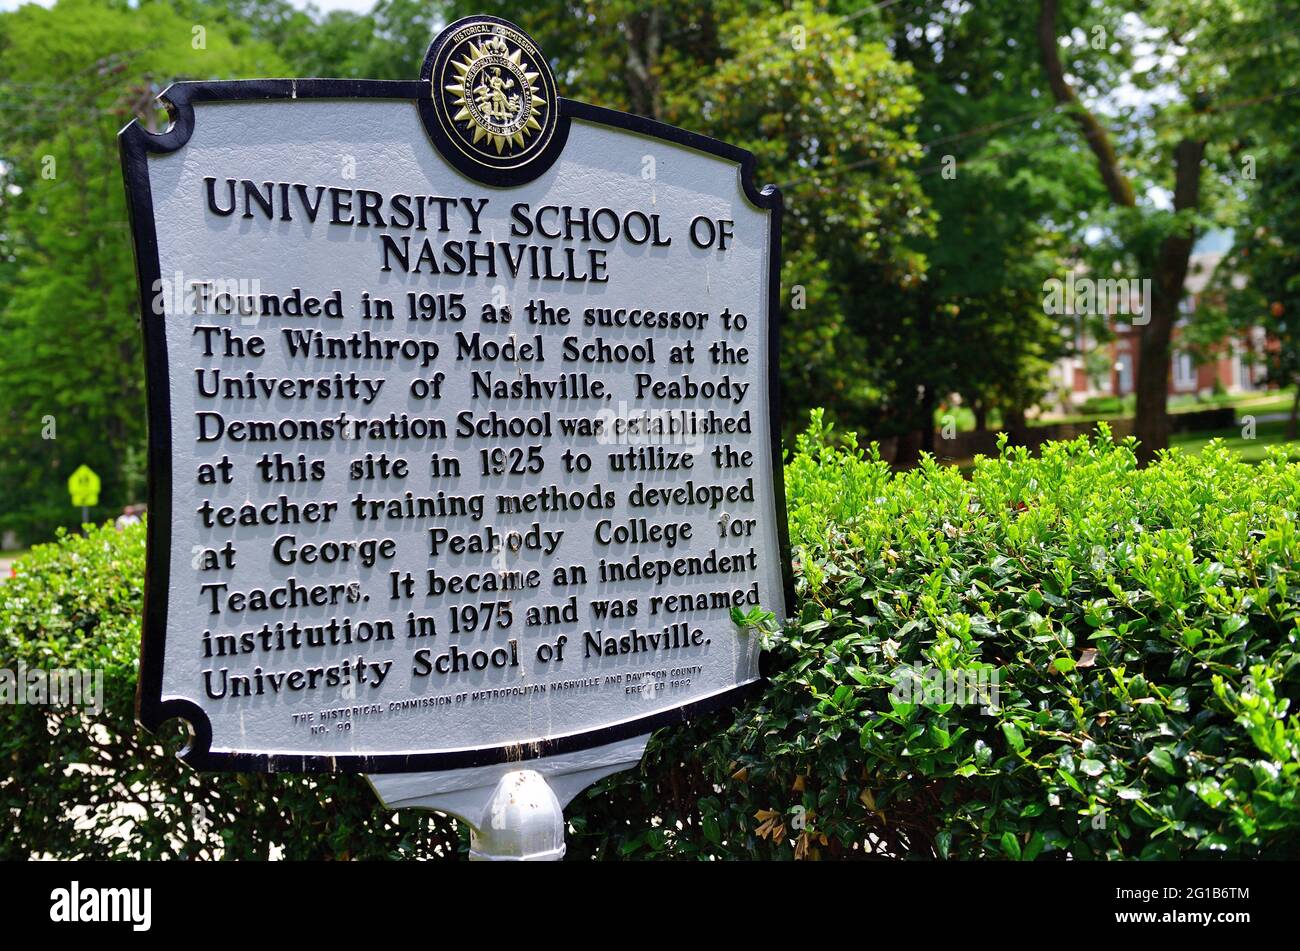 Nashville, Tennessee, USA. A Historical Commission sign on the grounds of the University School of Nashville, or USN. Stock Photo